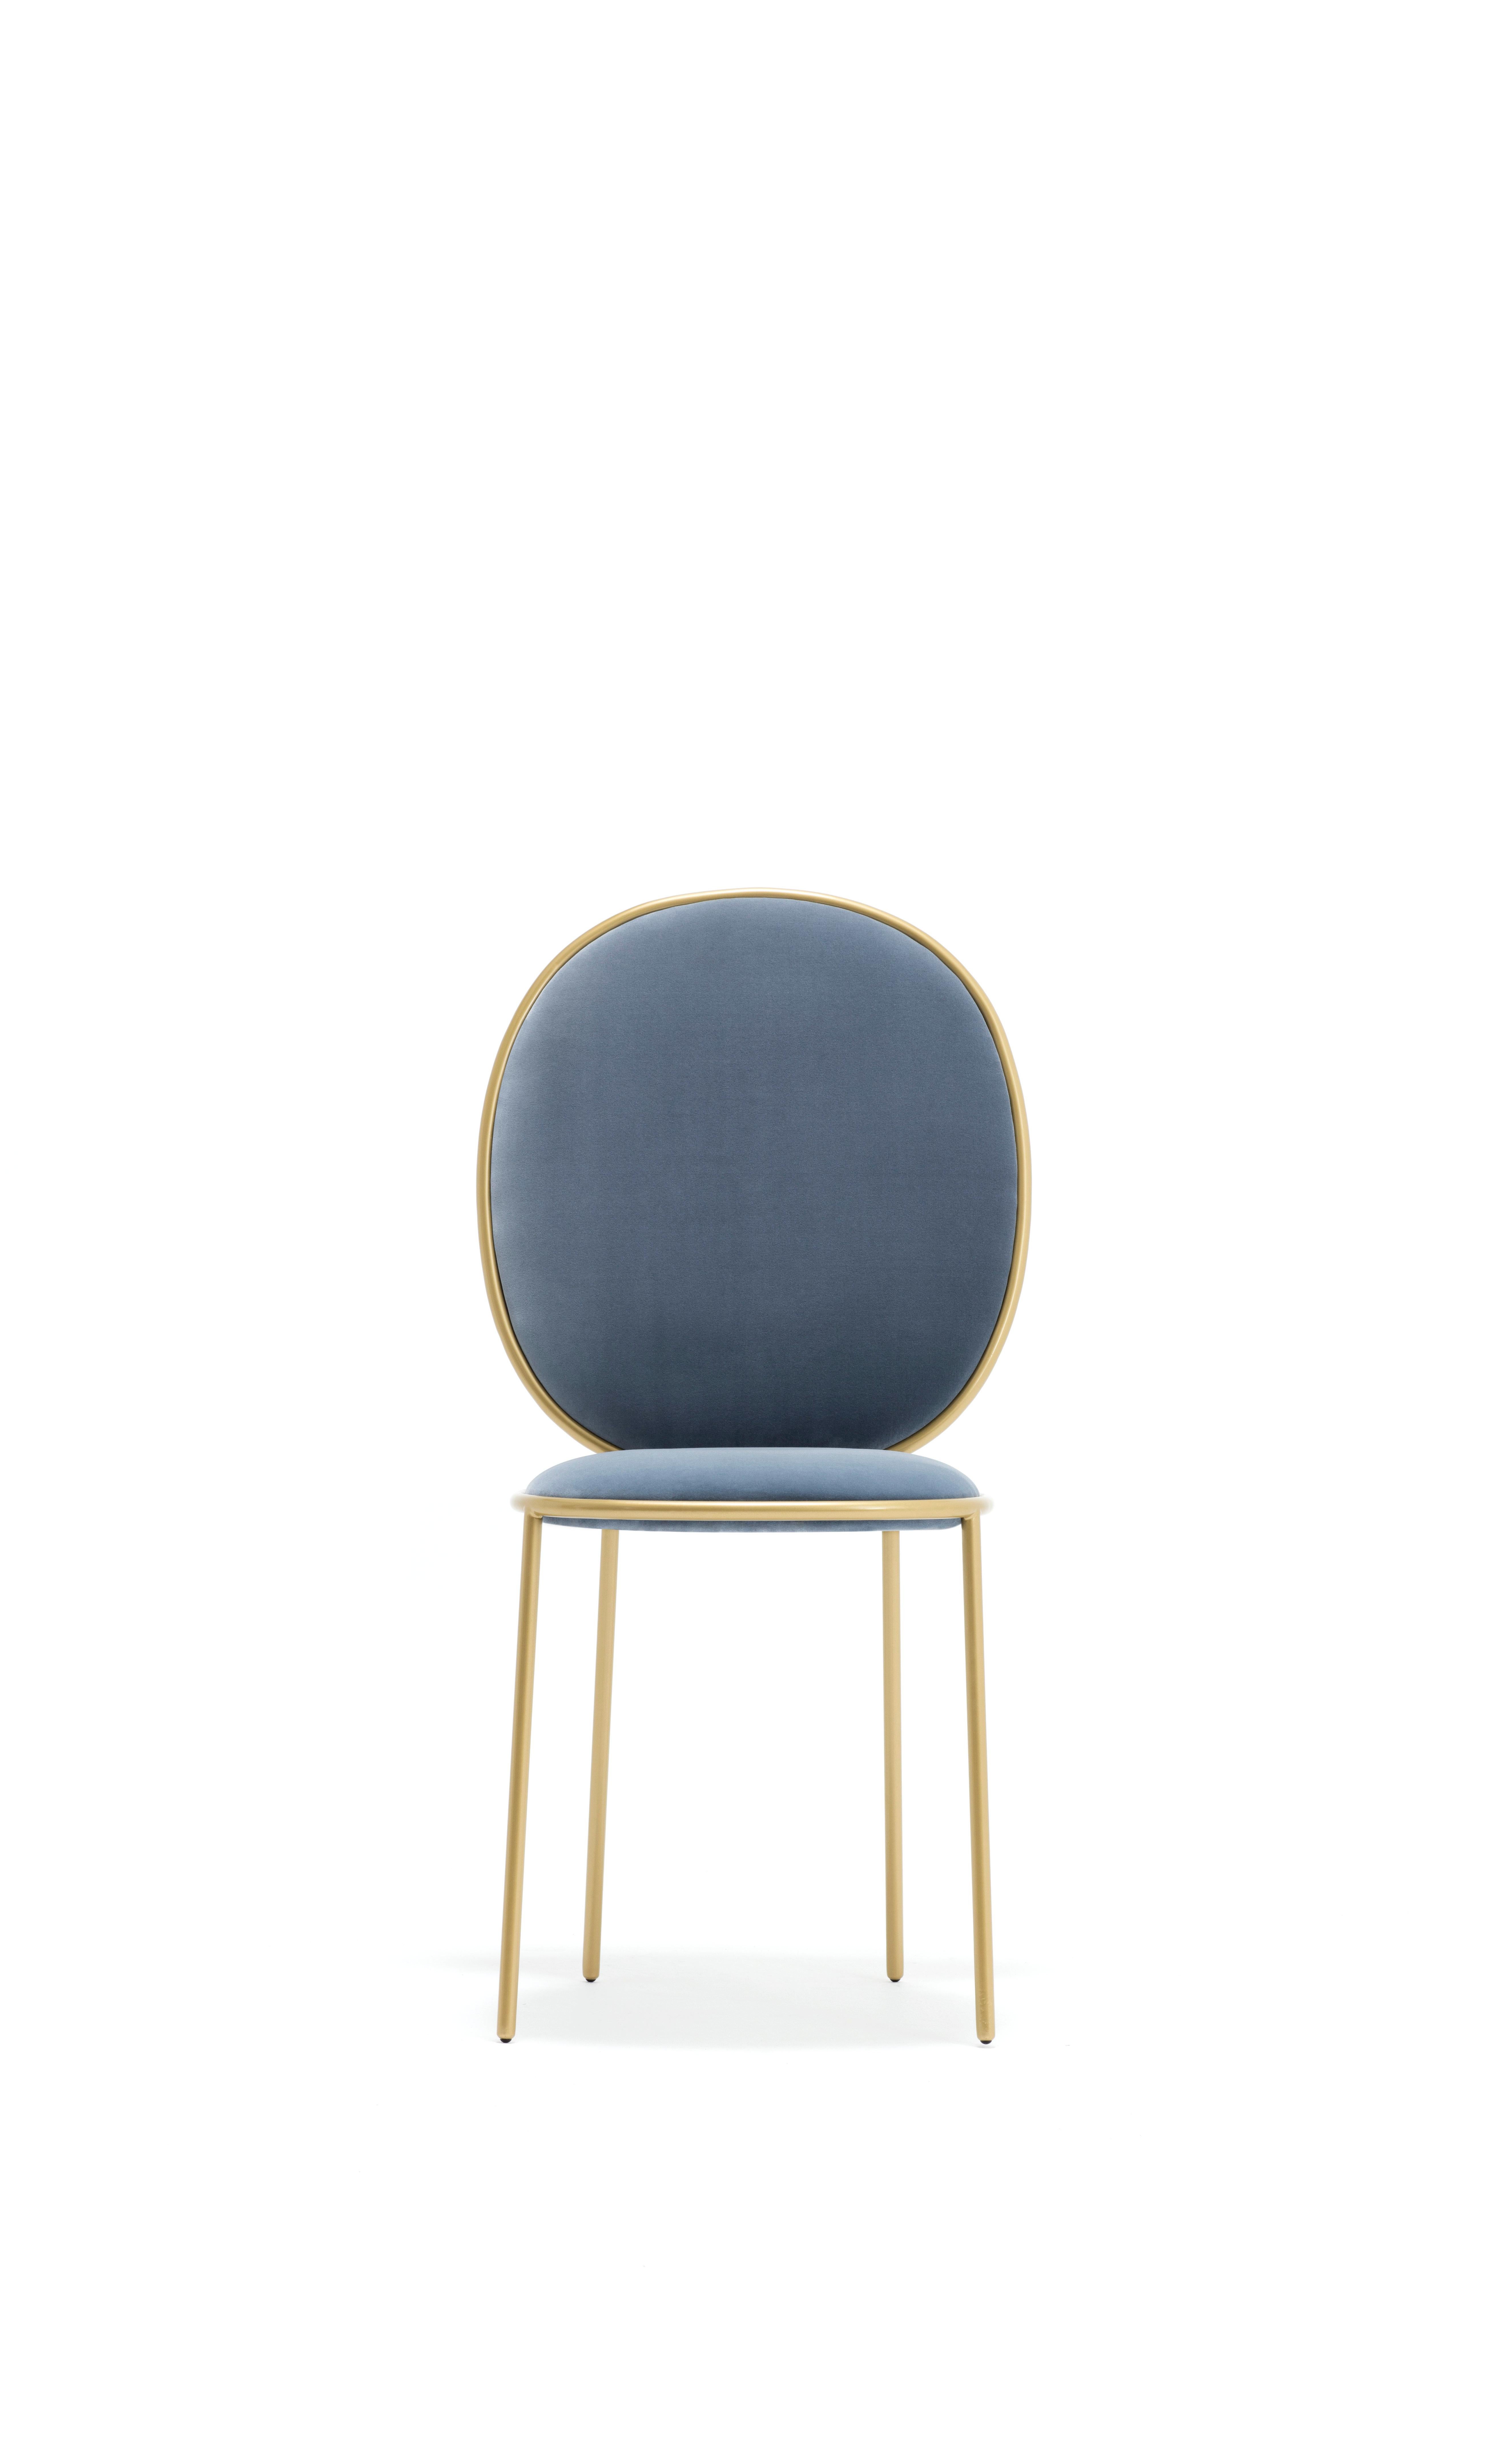 Contemporary Acier Blue Velvet Upholstered Dining Chair - Stay by Nika Zupanc

The Stay Family turns everyday seating into a special occasion. The Dining Chair and Dining Armchair are variations on an elegant social theme whilst the Dining Table